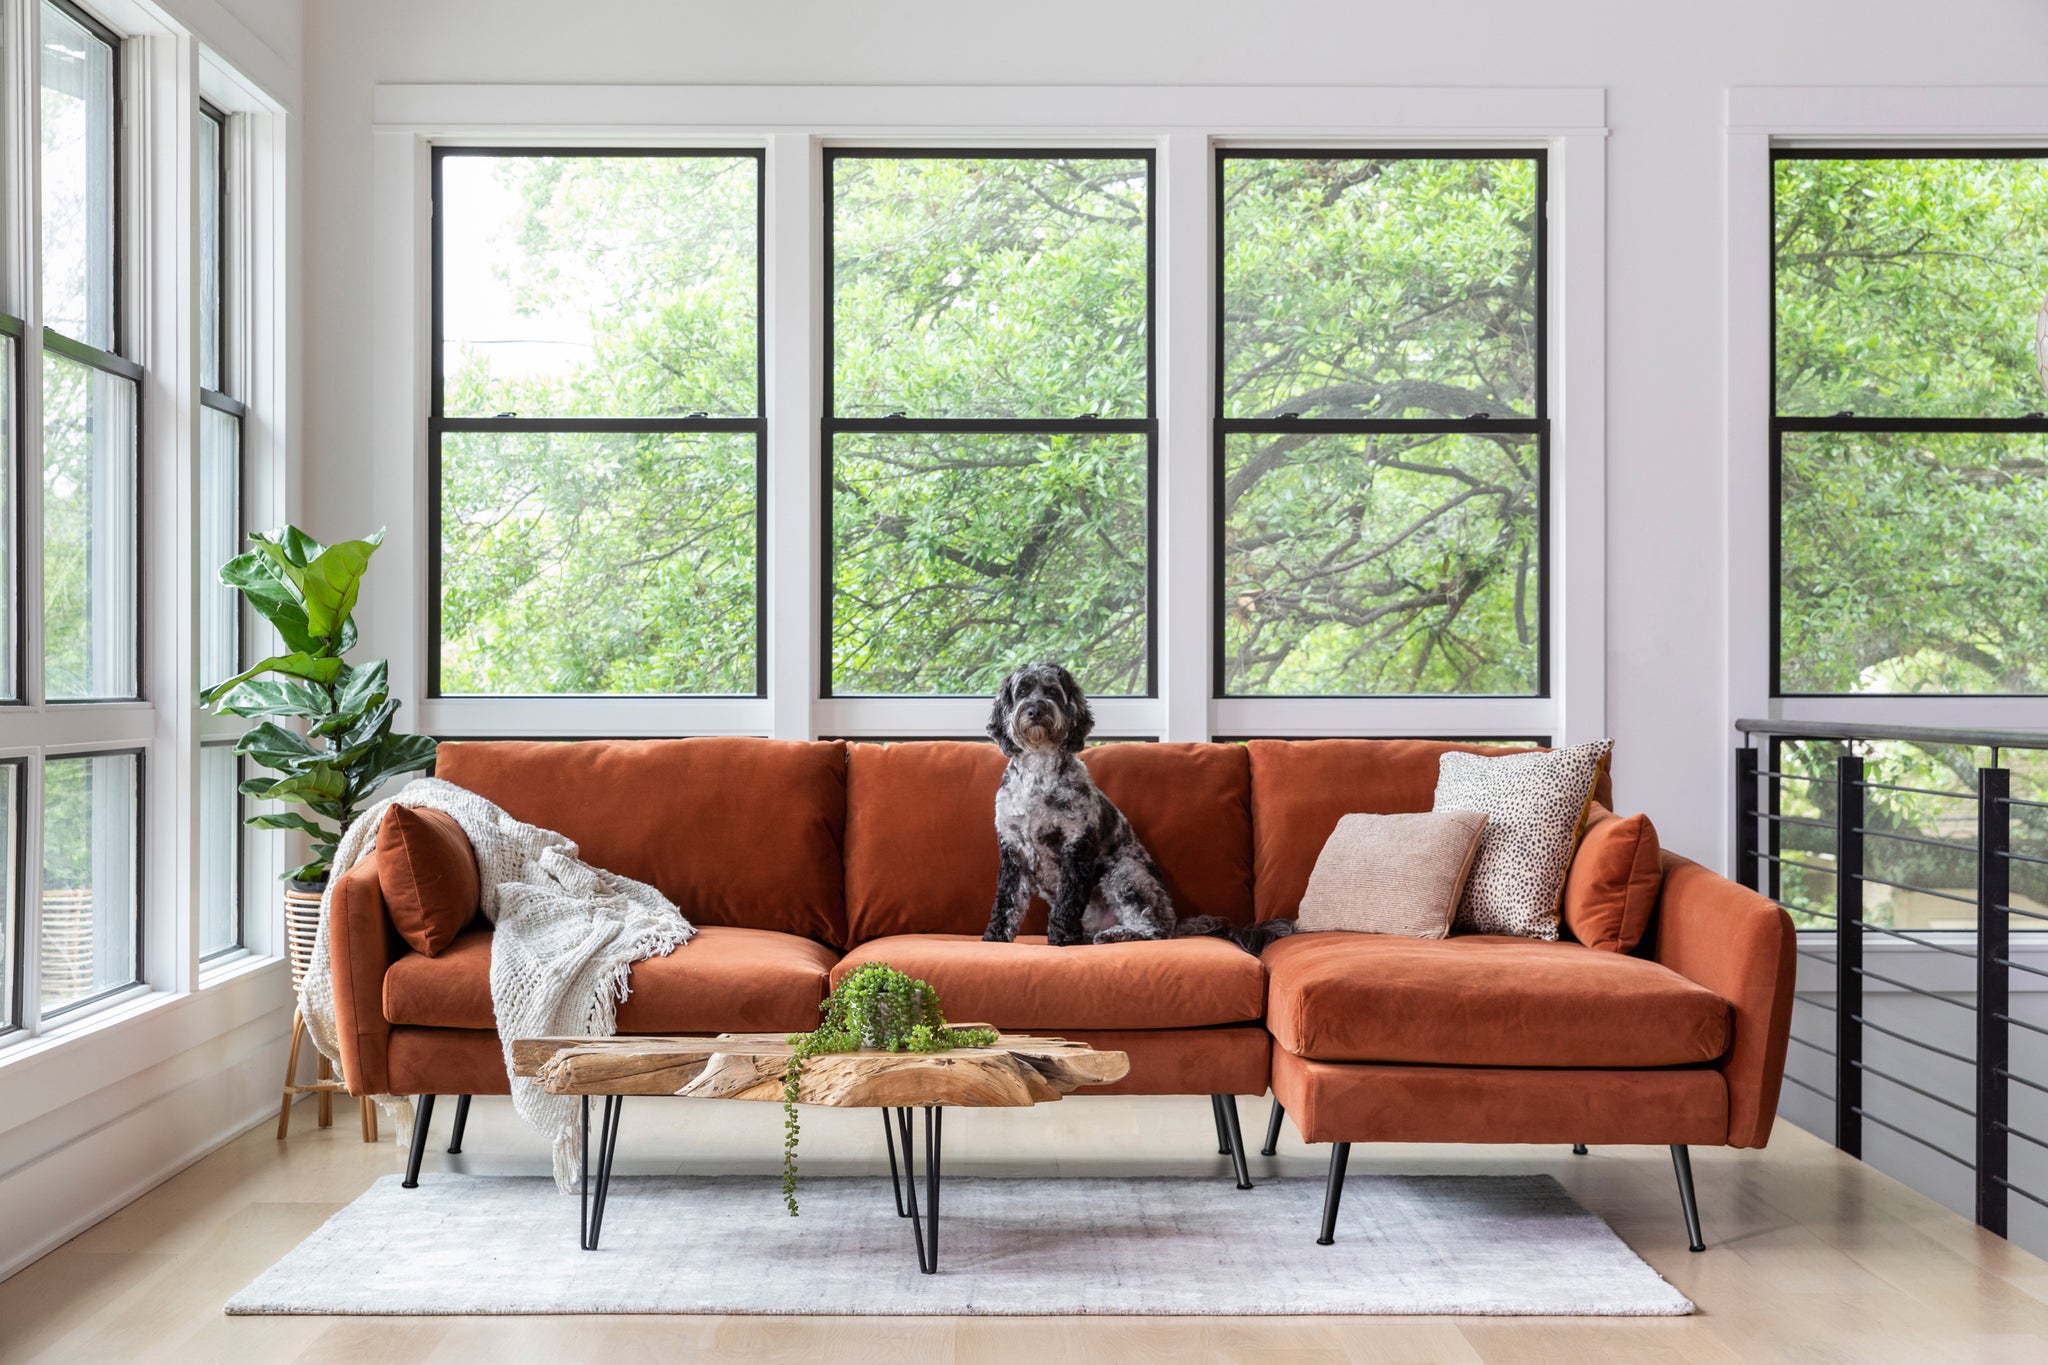 park sectional sofa shown in rust velvet with black legs right facing